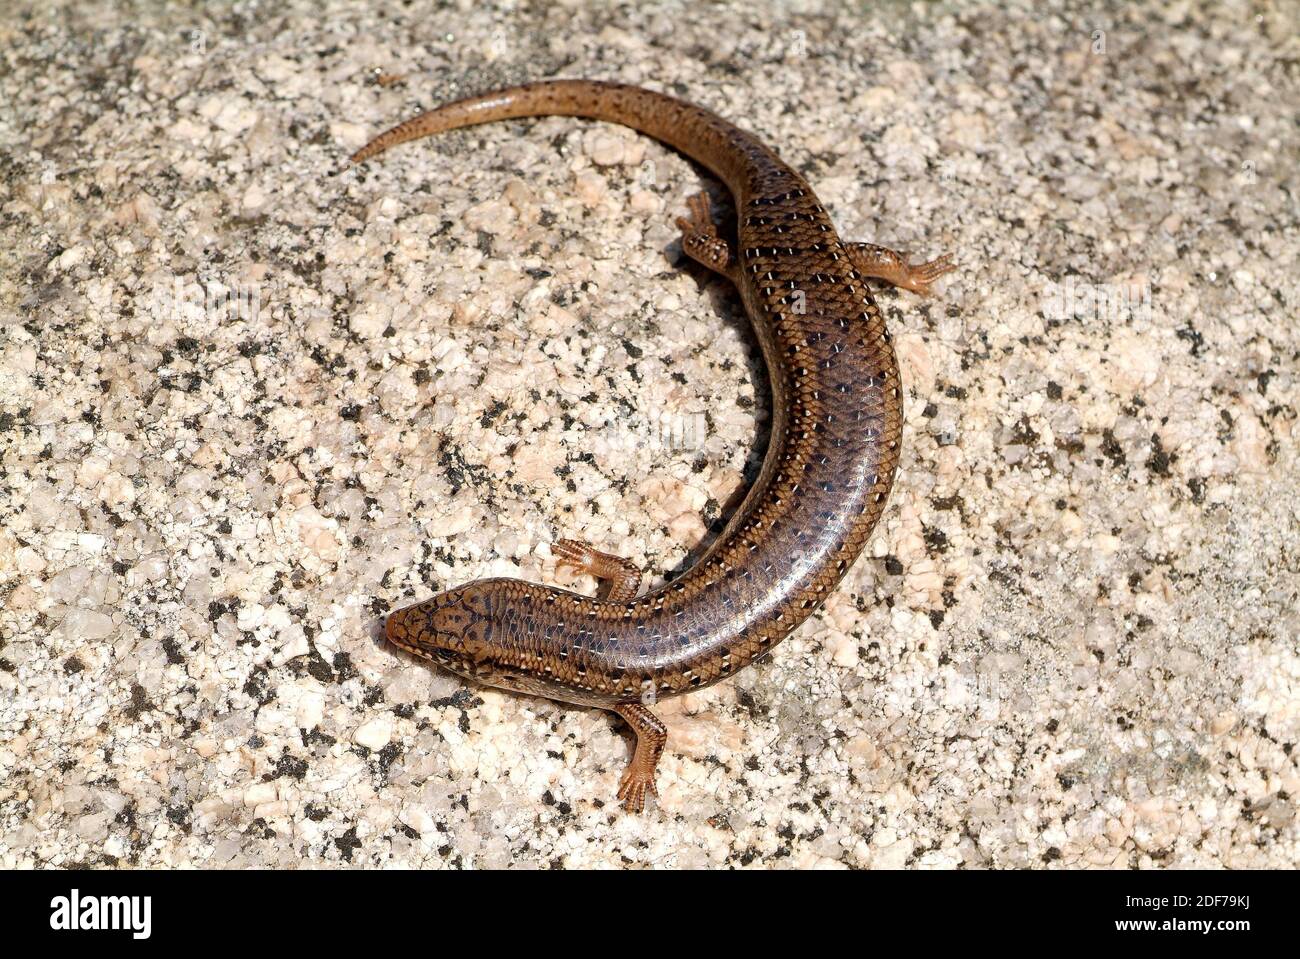 Ocellated skink or gongilo (Chalcides ocellatus) is a skink native to eastern Mediterranean Basin and India. This photo was taken in Sardinia, Italy. Stock Photo